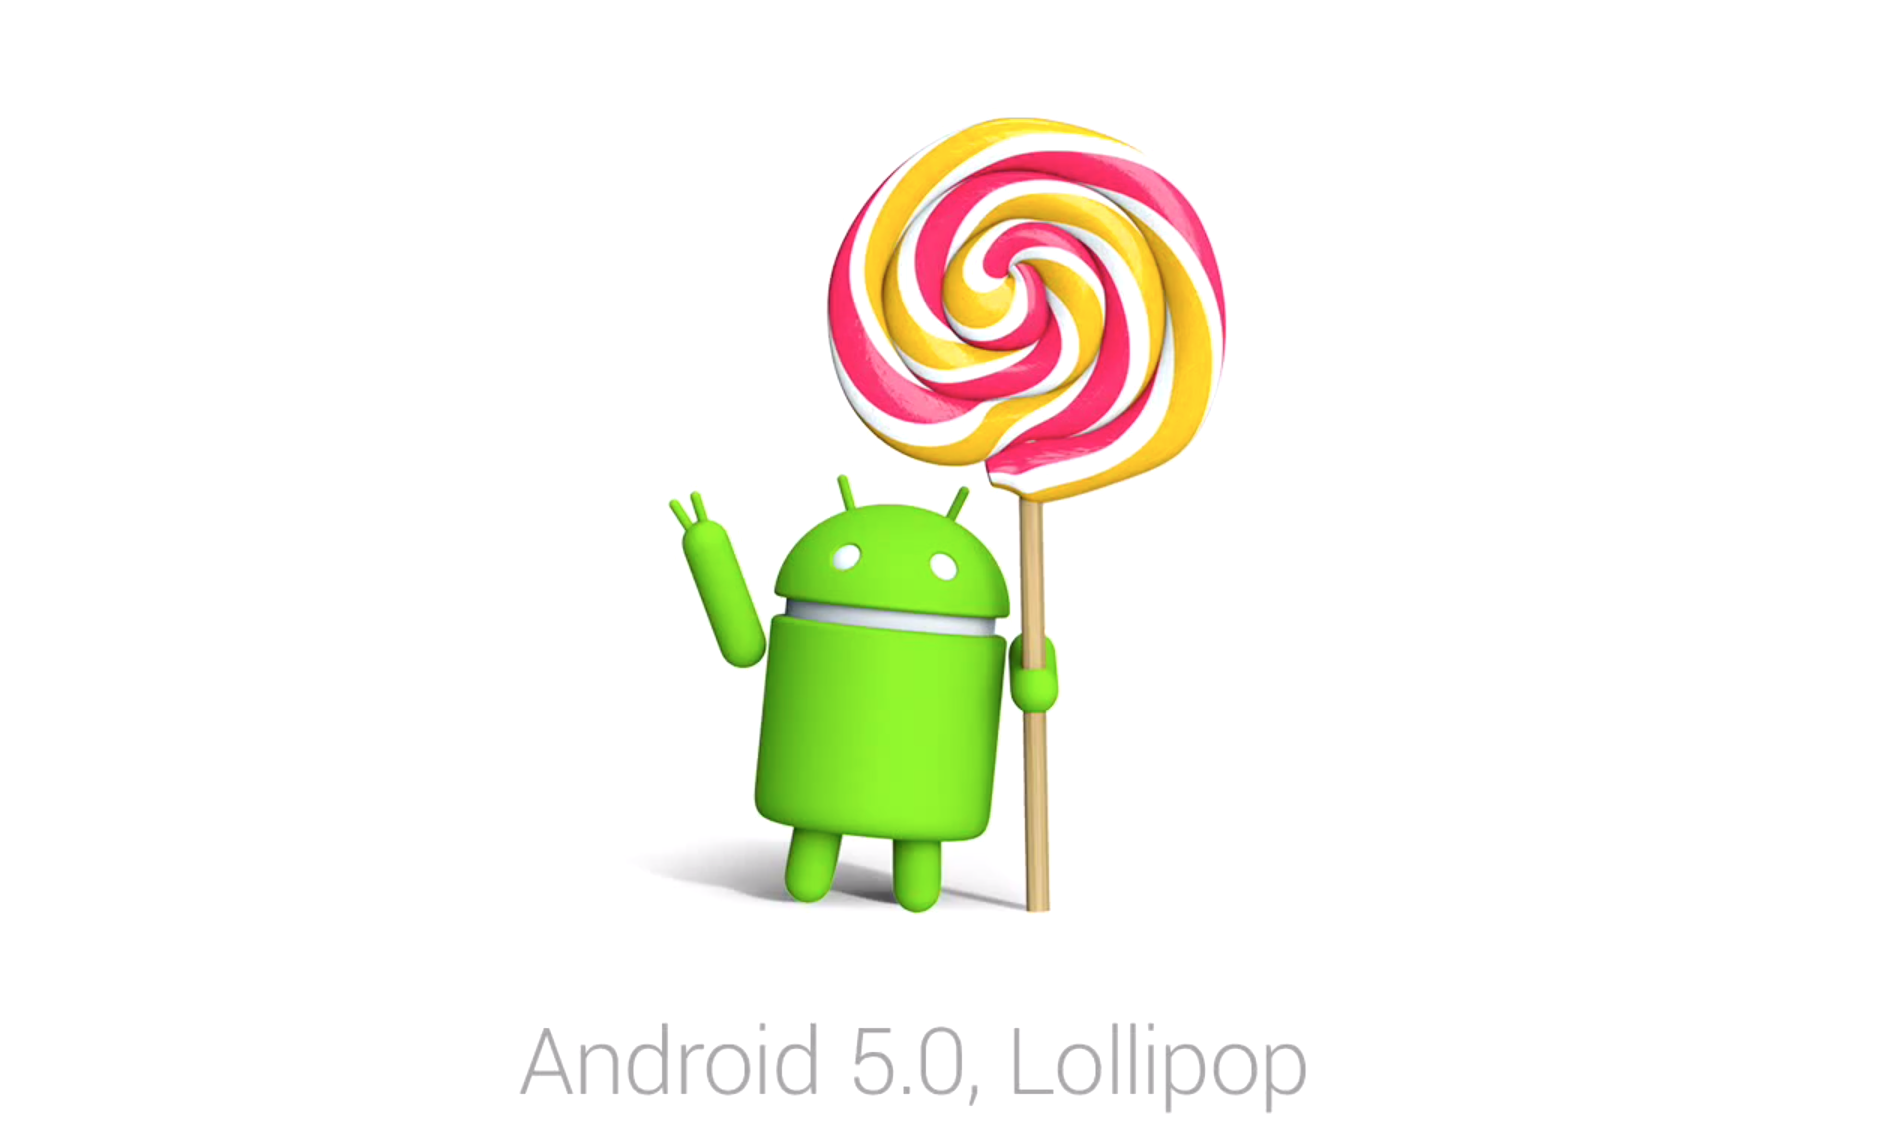 Android Lollipop 5.0 – What? When? Where?